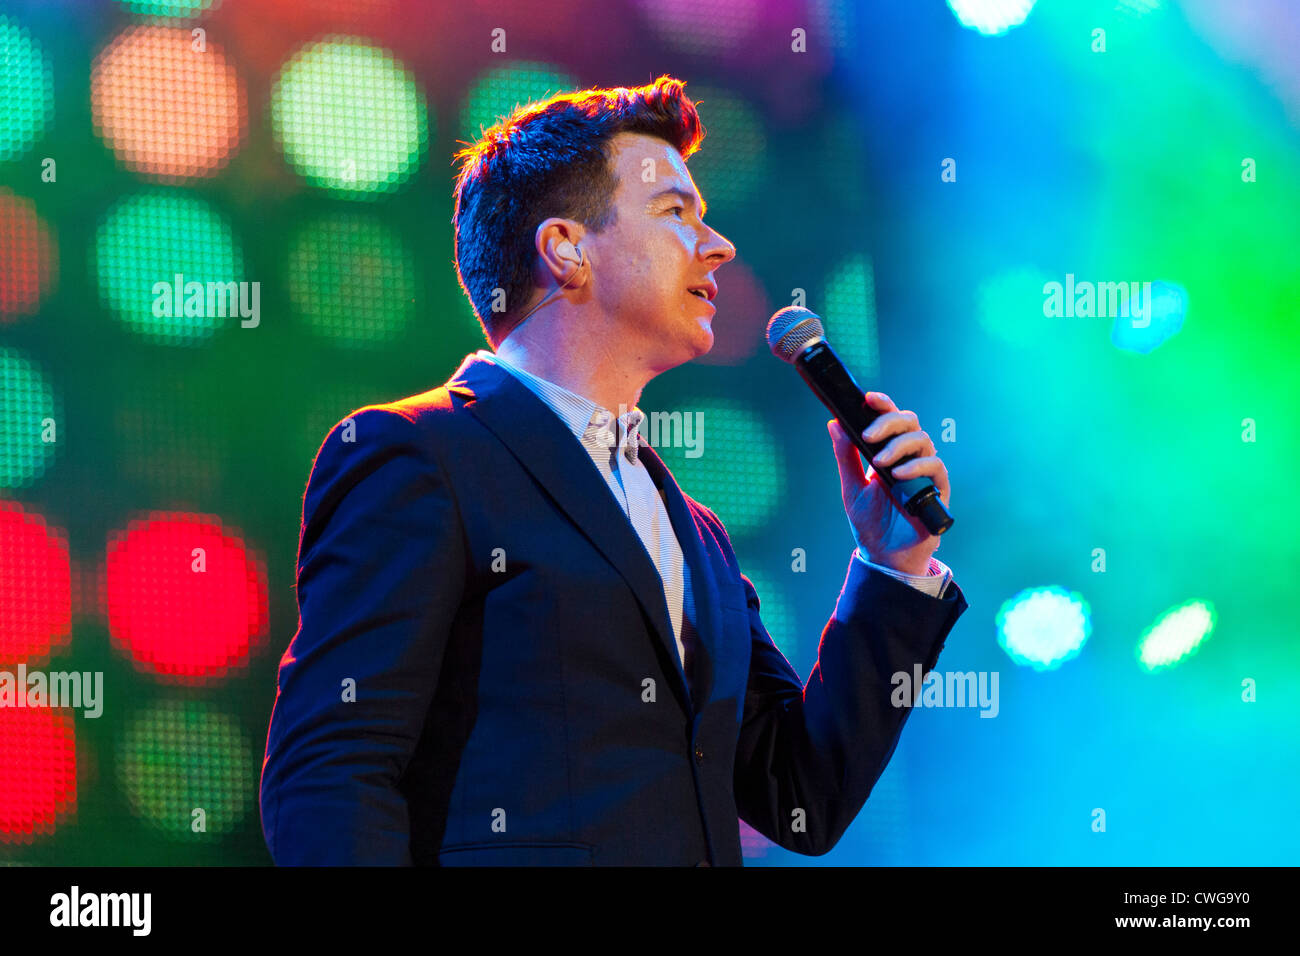 Singer Rick Astley performing on stage at the Rewind Festival Henley on Thames 2012. PER0265 Stock Photo